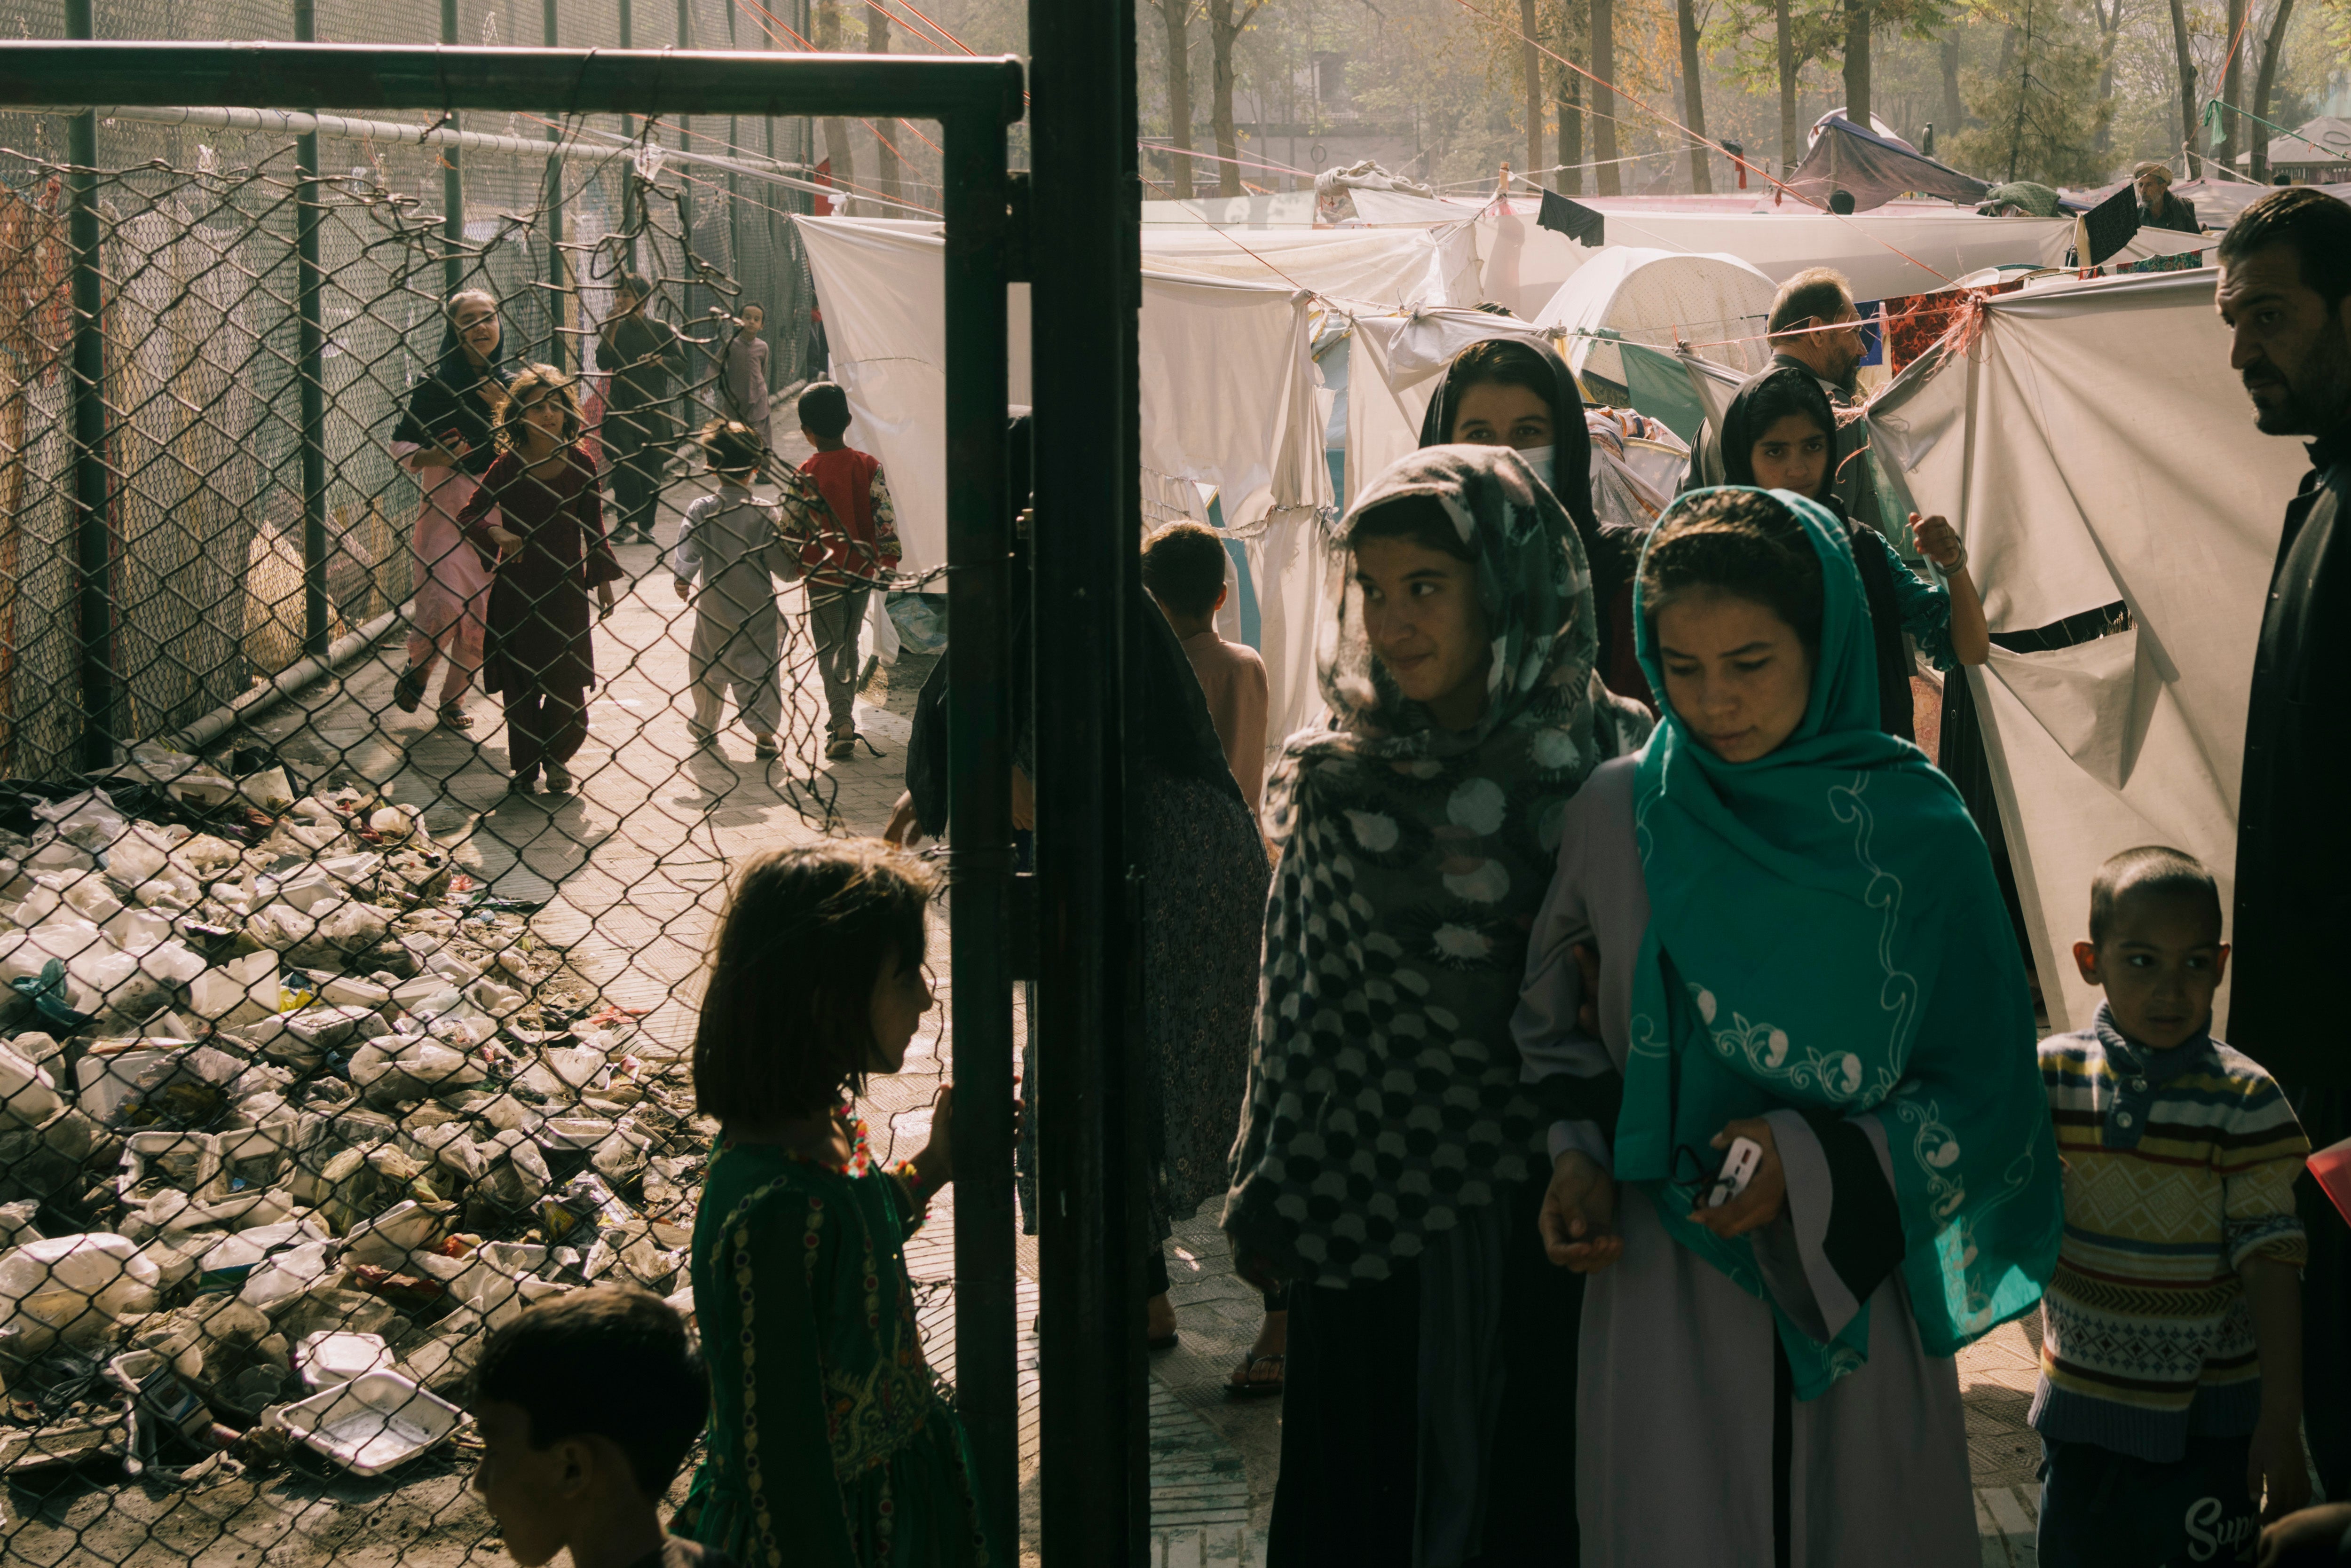 A park in central Kabul has turned into a refugee camp